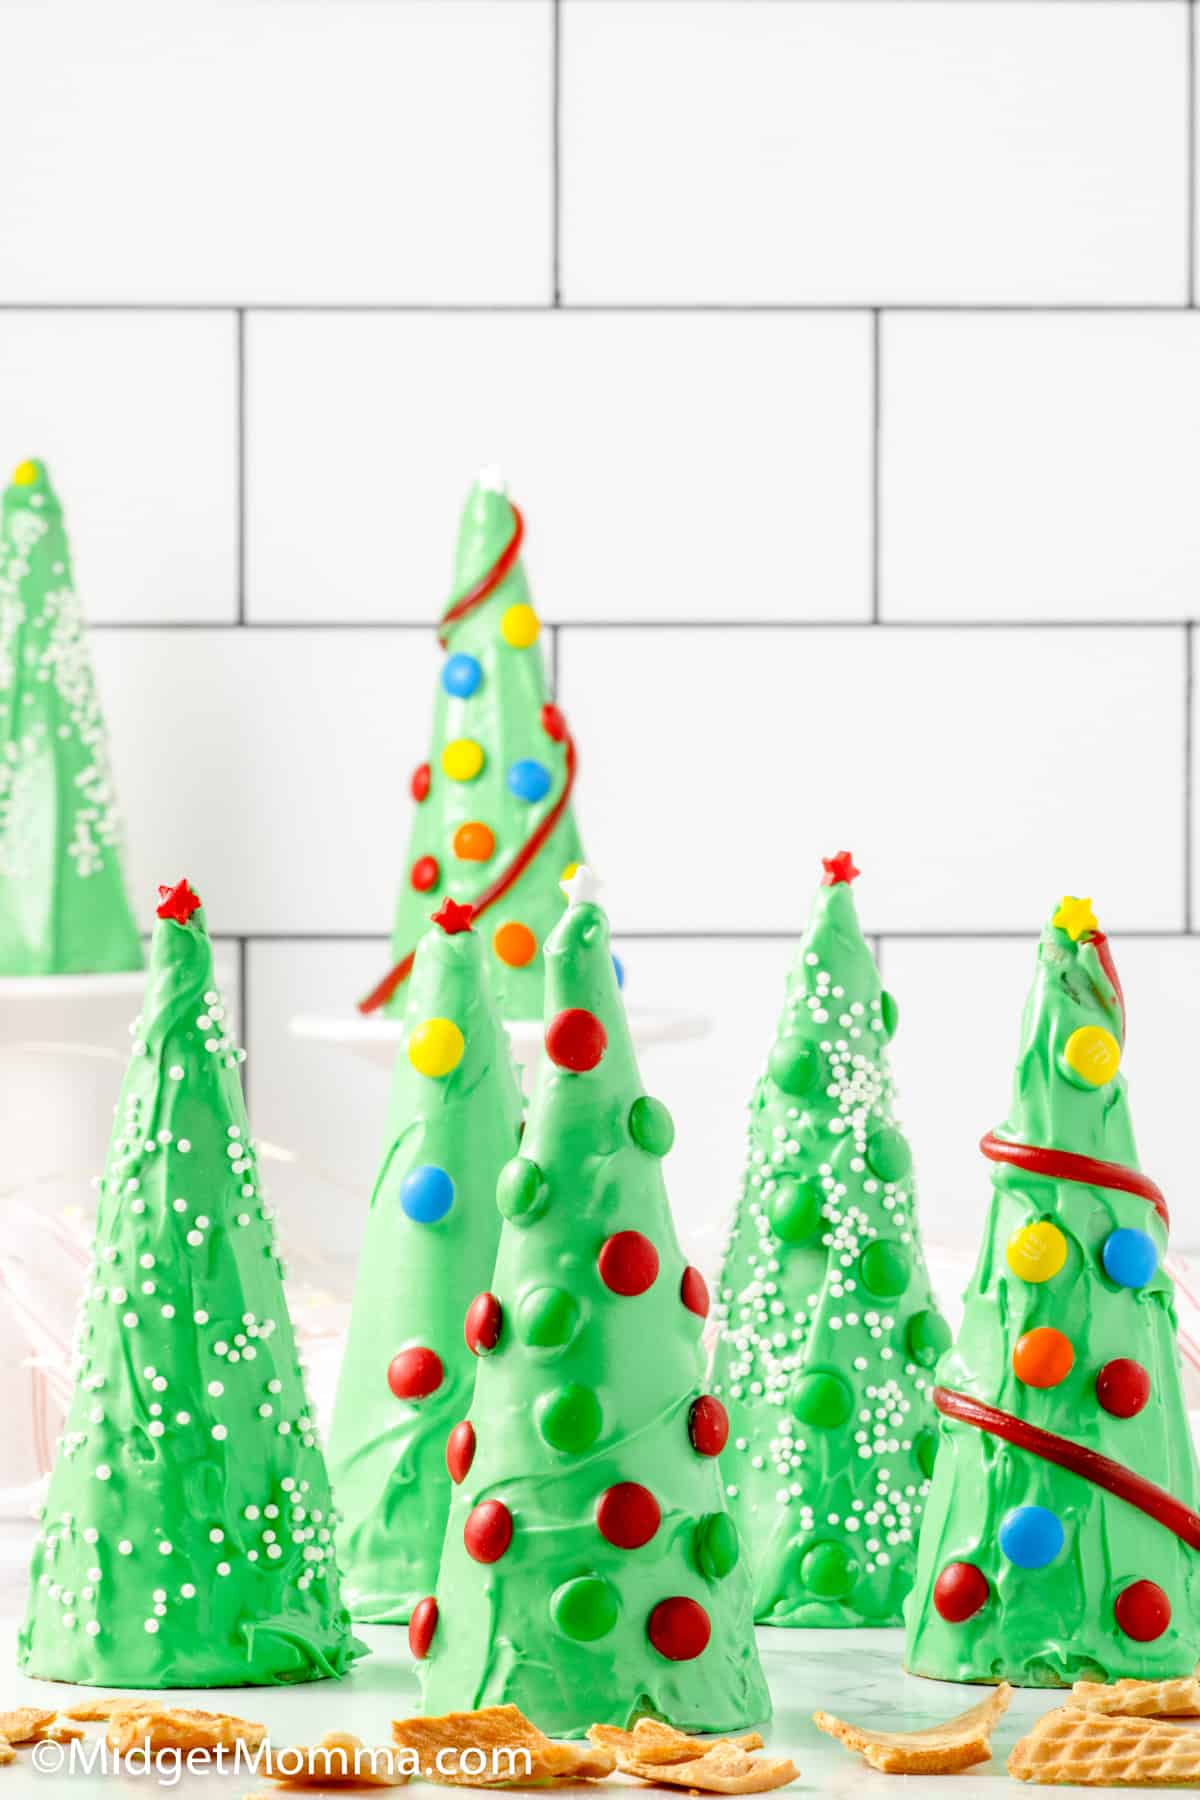 Image of edible decorative trees